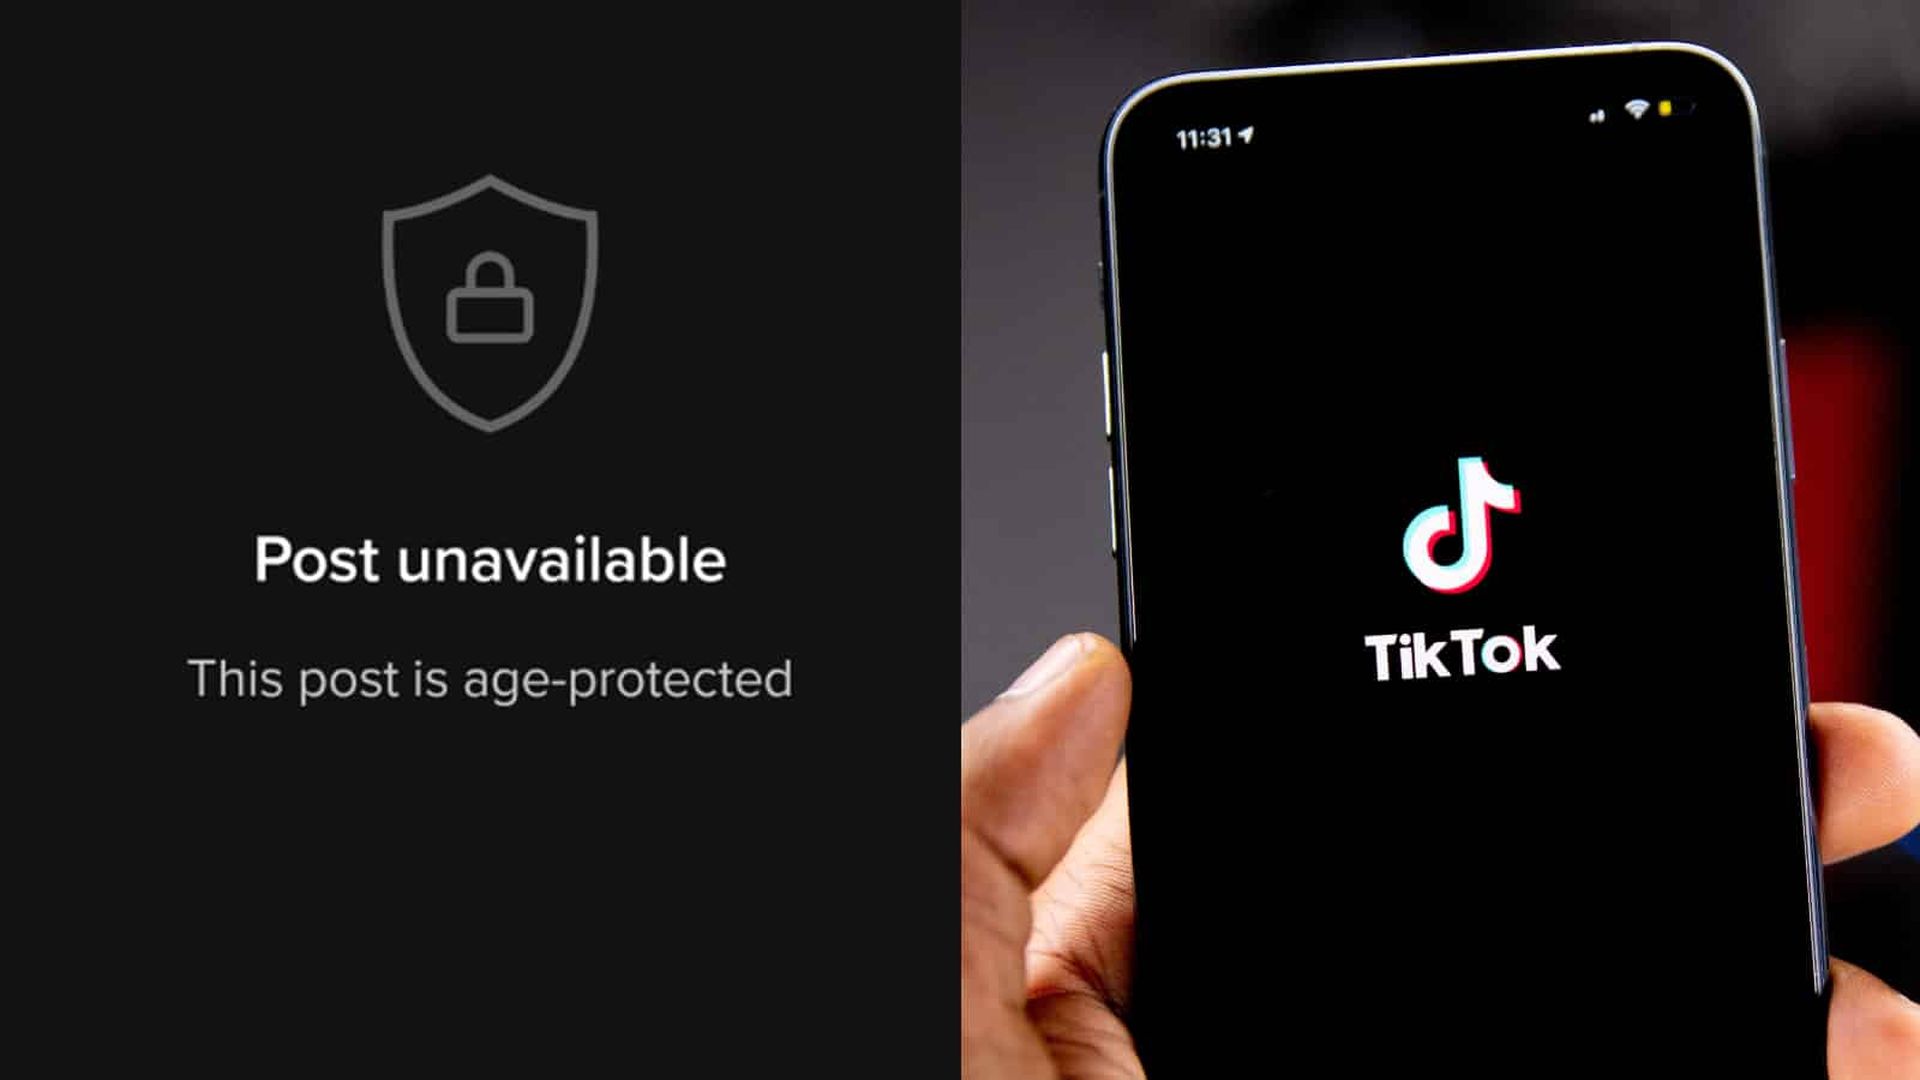 Today, we'll be going over how to fix age restriction on TikTok, which some users have reported lately that it is stopping them from viewing videos on the app.